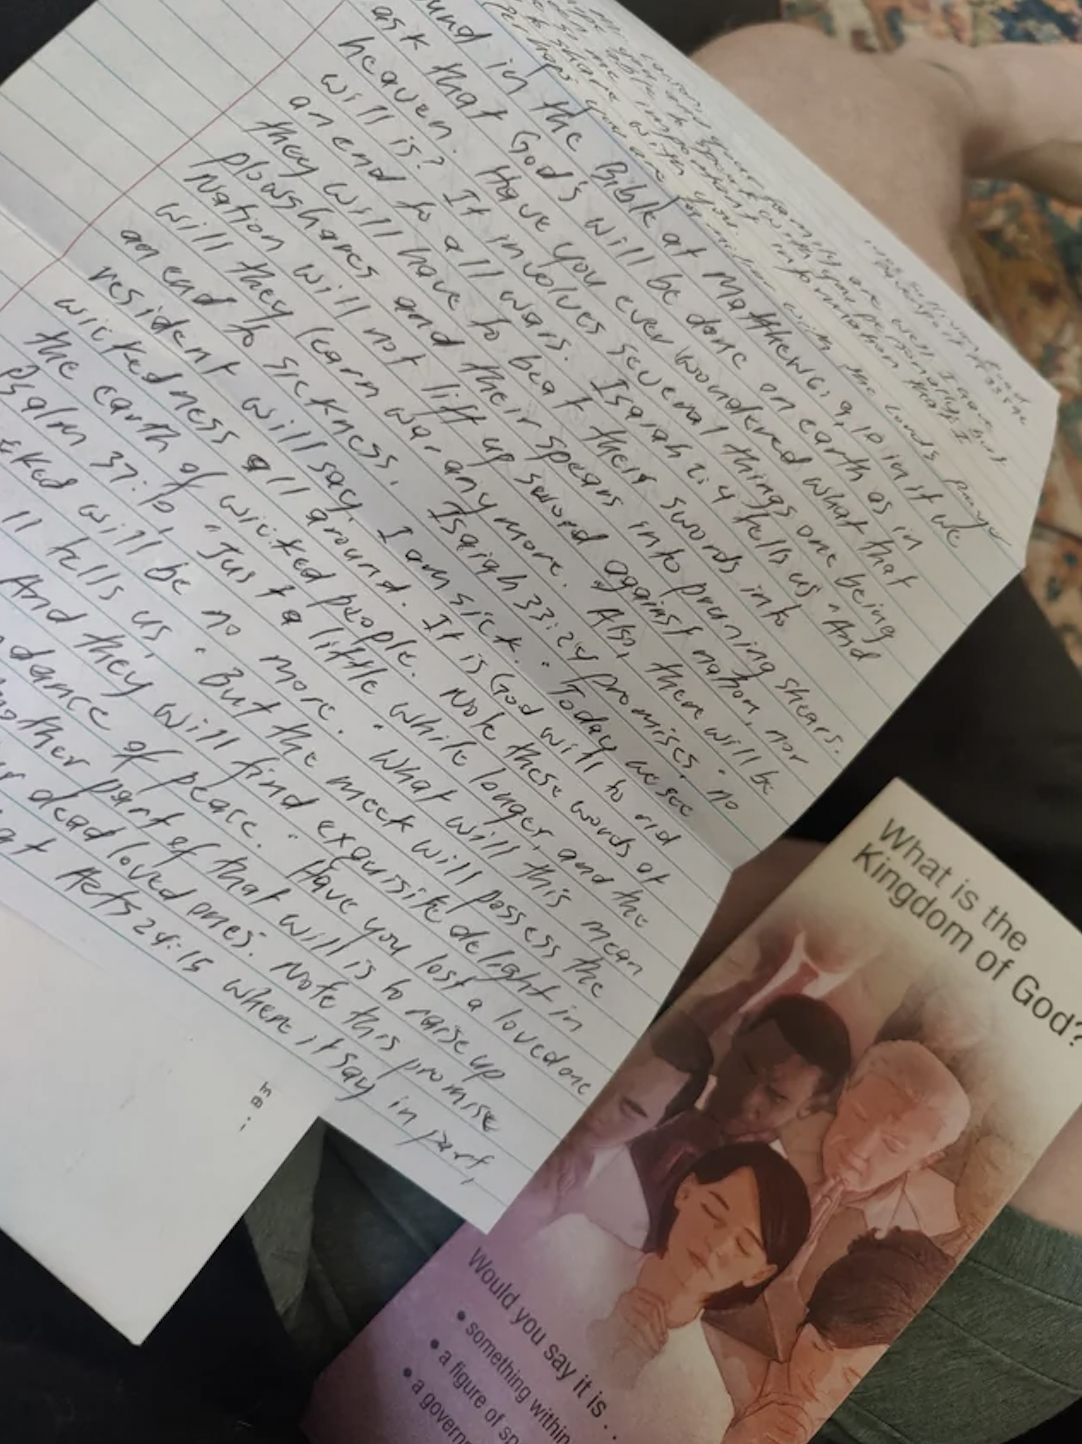 Jehovah's witnesses sent me a hand written letter WITH MY NAME ON IT asking me to bible study.